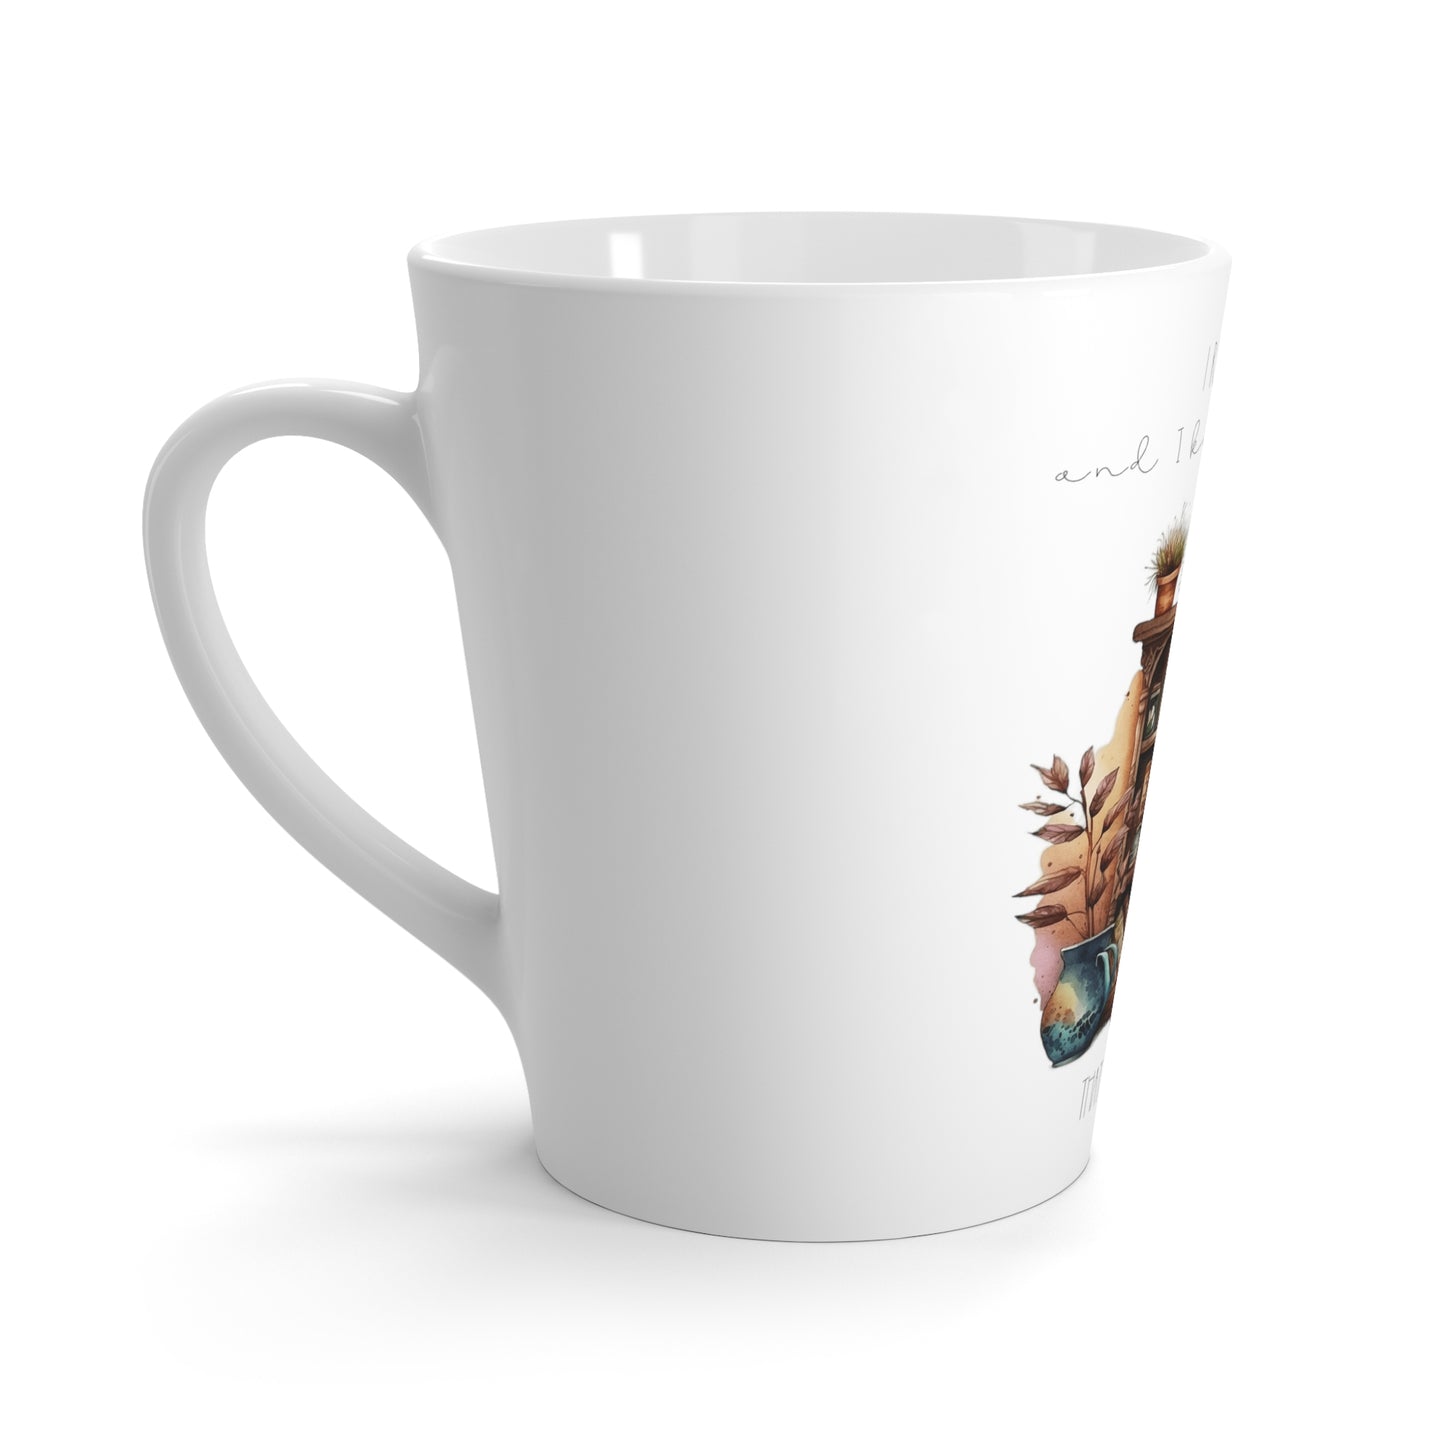 “I read books and I know Things. That’s what I do.” Latte Mug